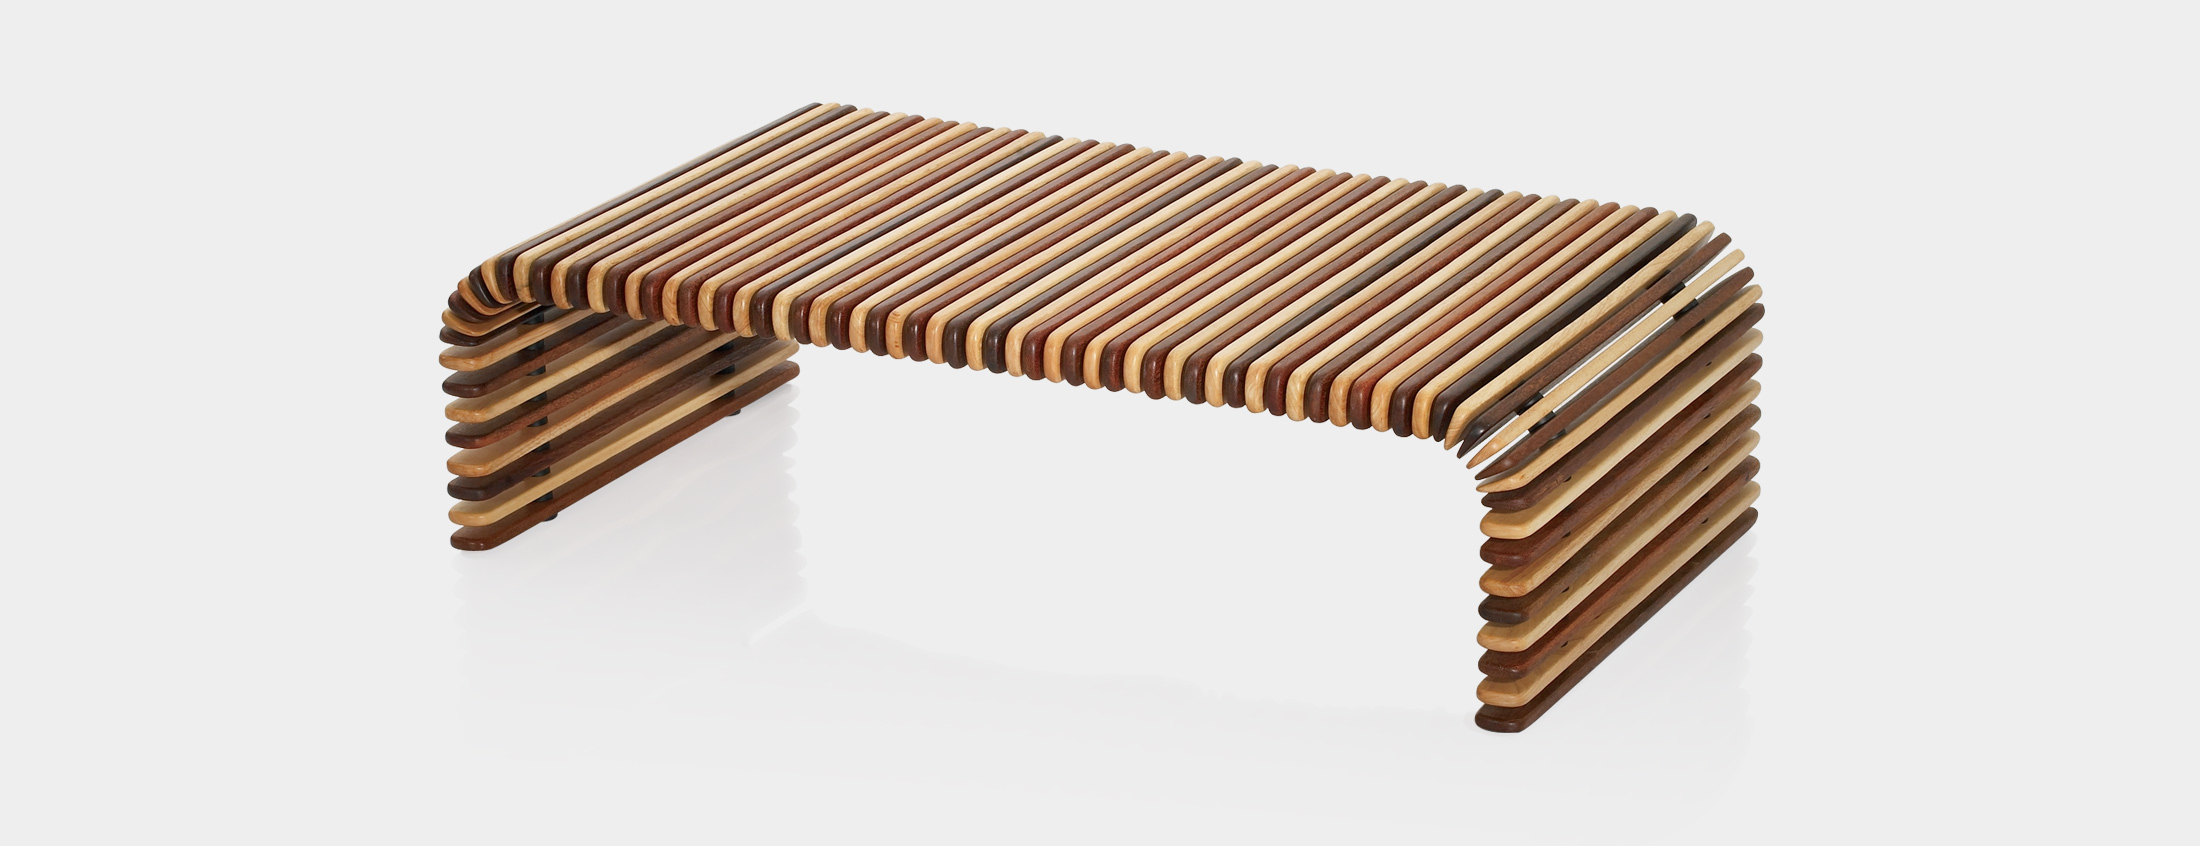 PRODUCT DESCRIPTION Palmwood and steel table with leather bindings. The table is also available in single tone dark Palmwood...